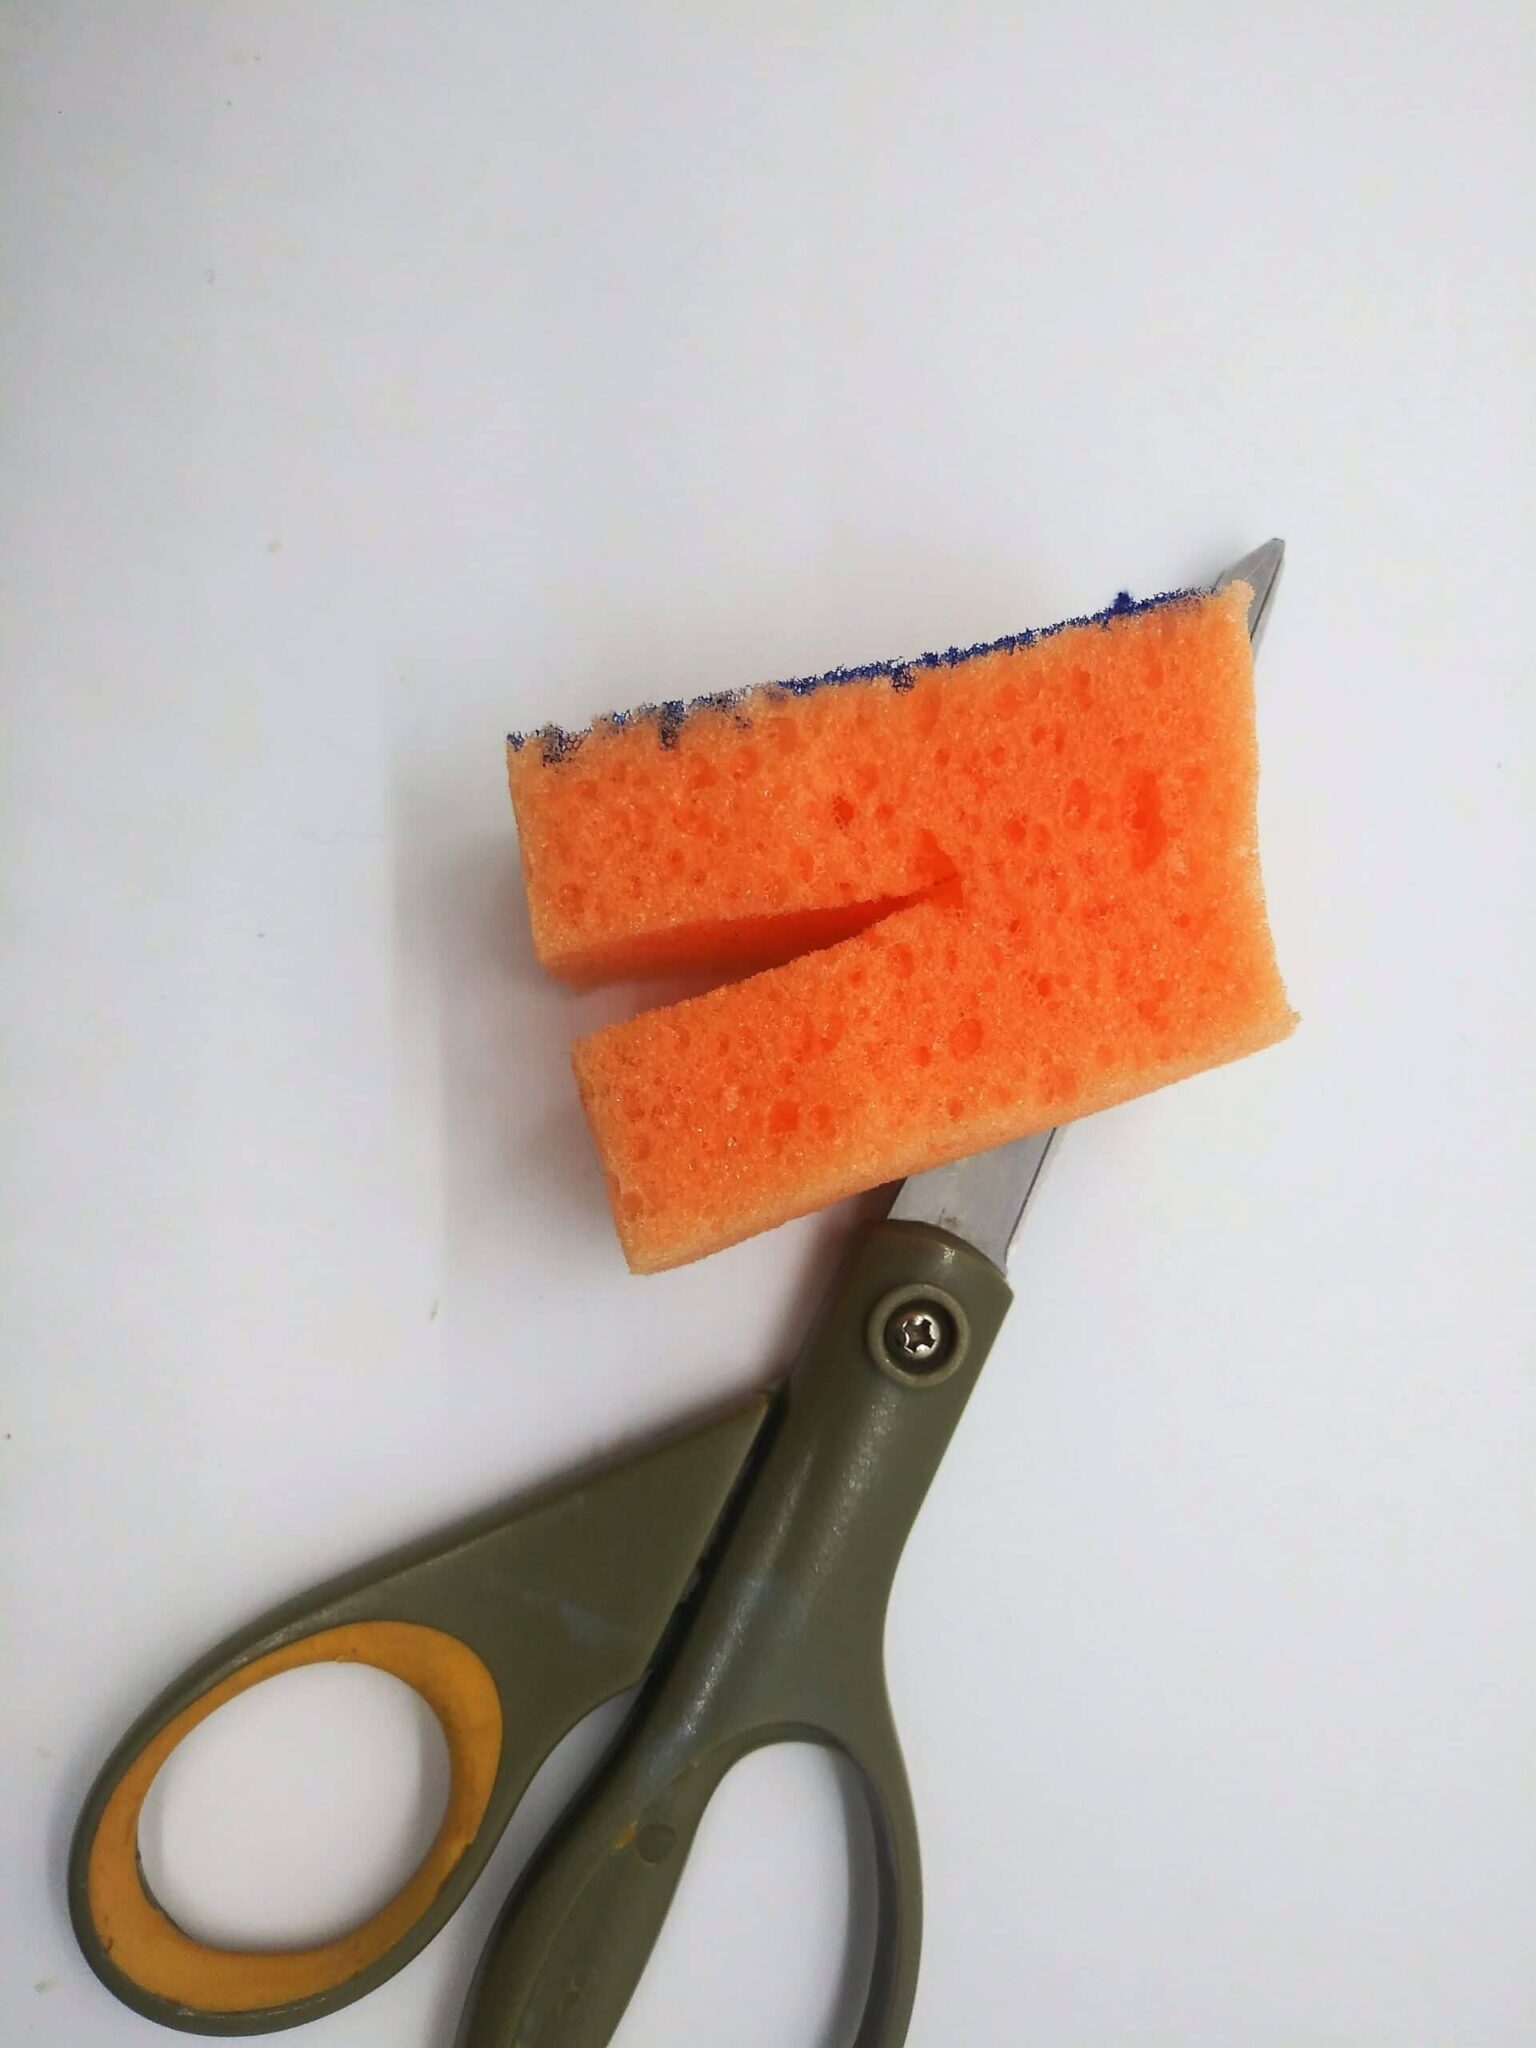 DIY anal sex toy from a hairbrush, photo of the small sponge piece being cut with scissors.